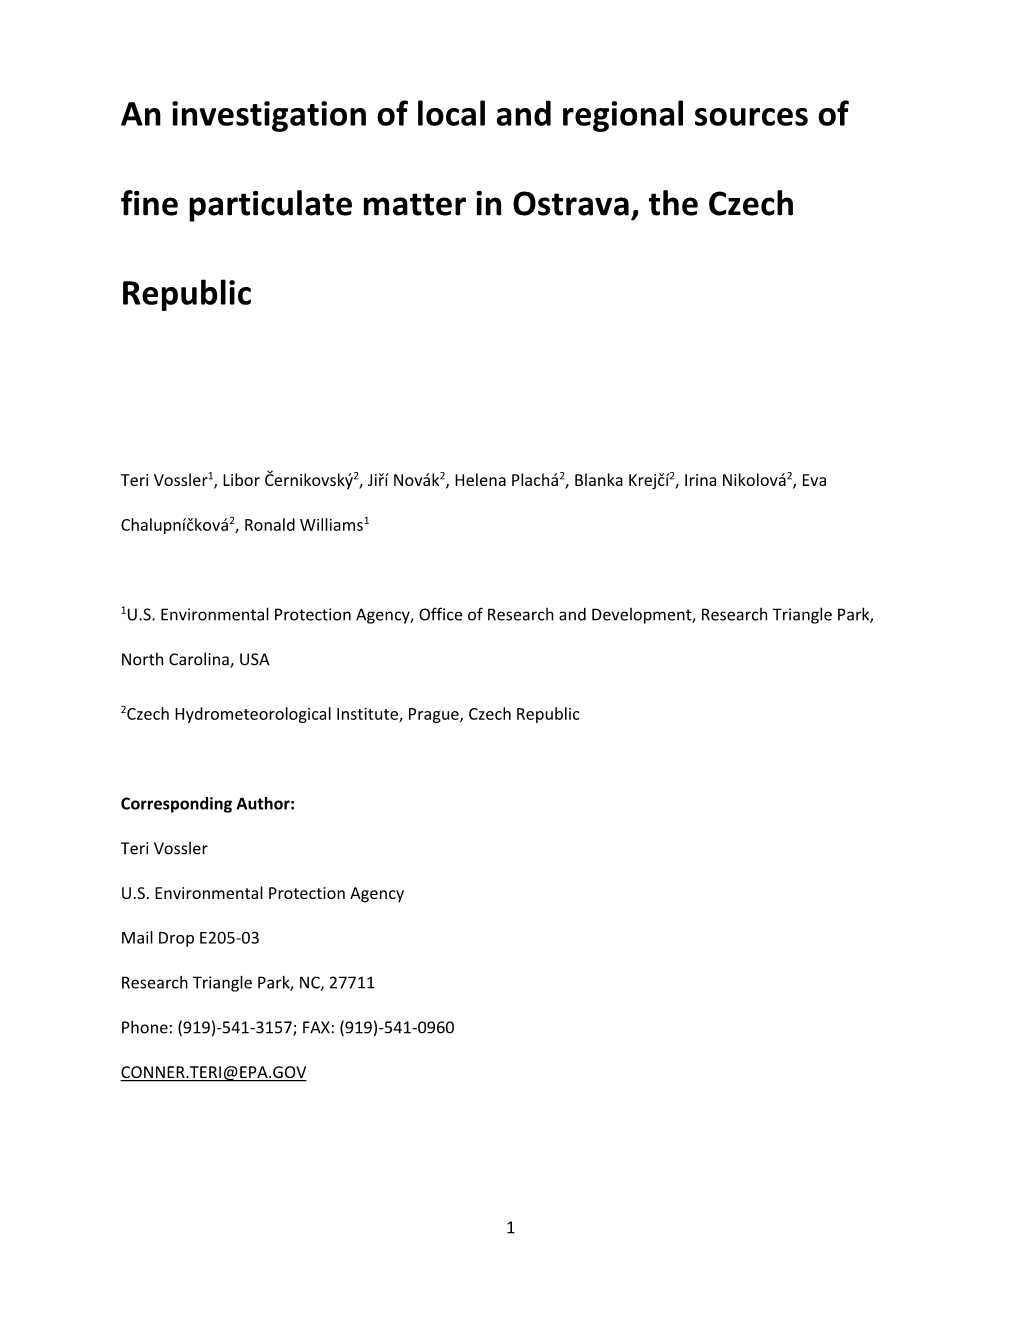 An Investigation of Local and Regional Sources of Fine Particulate Matter in Ostrava, the Czech